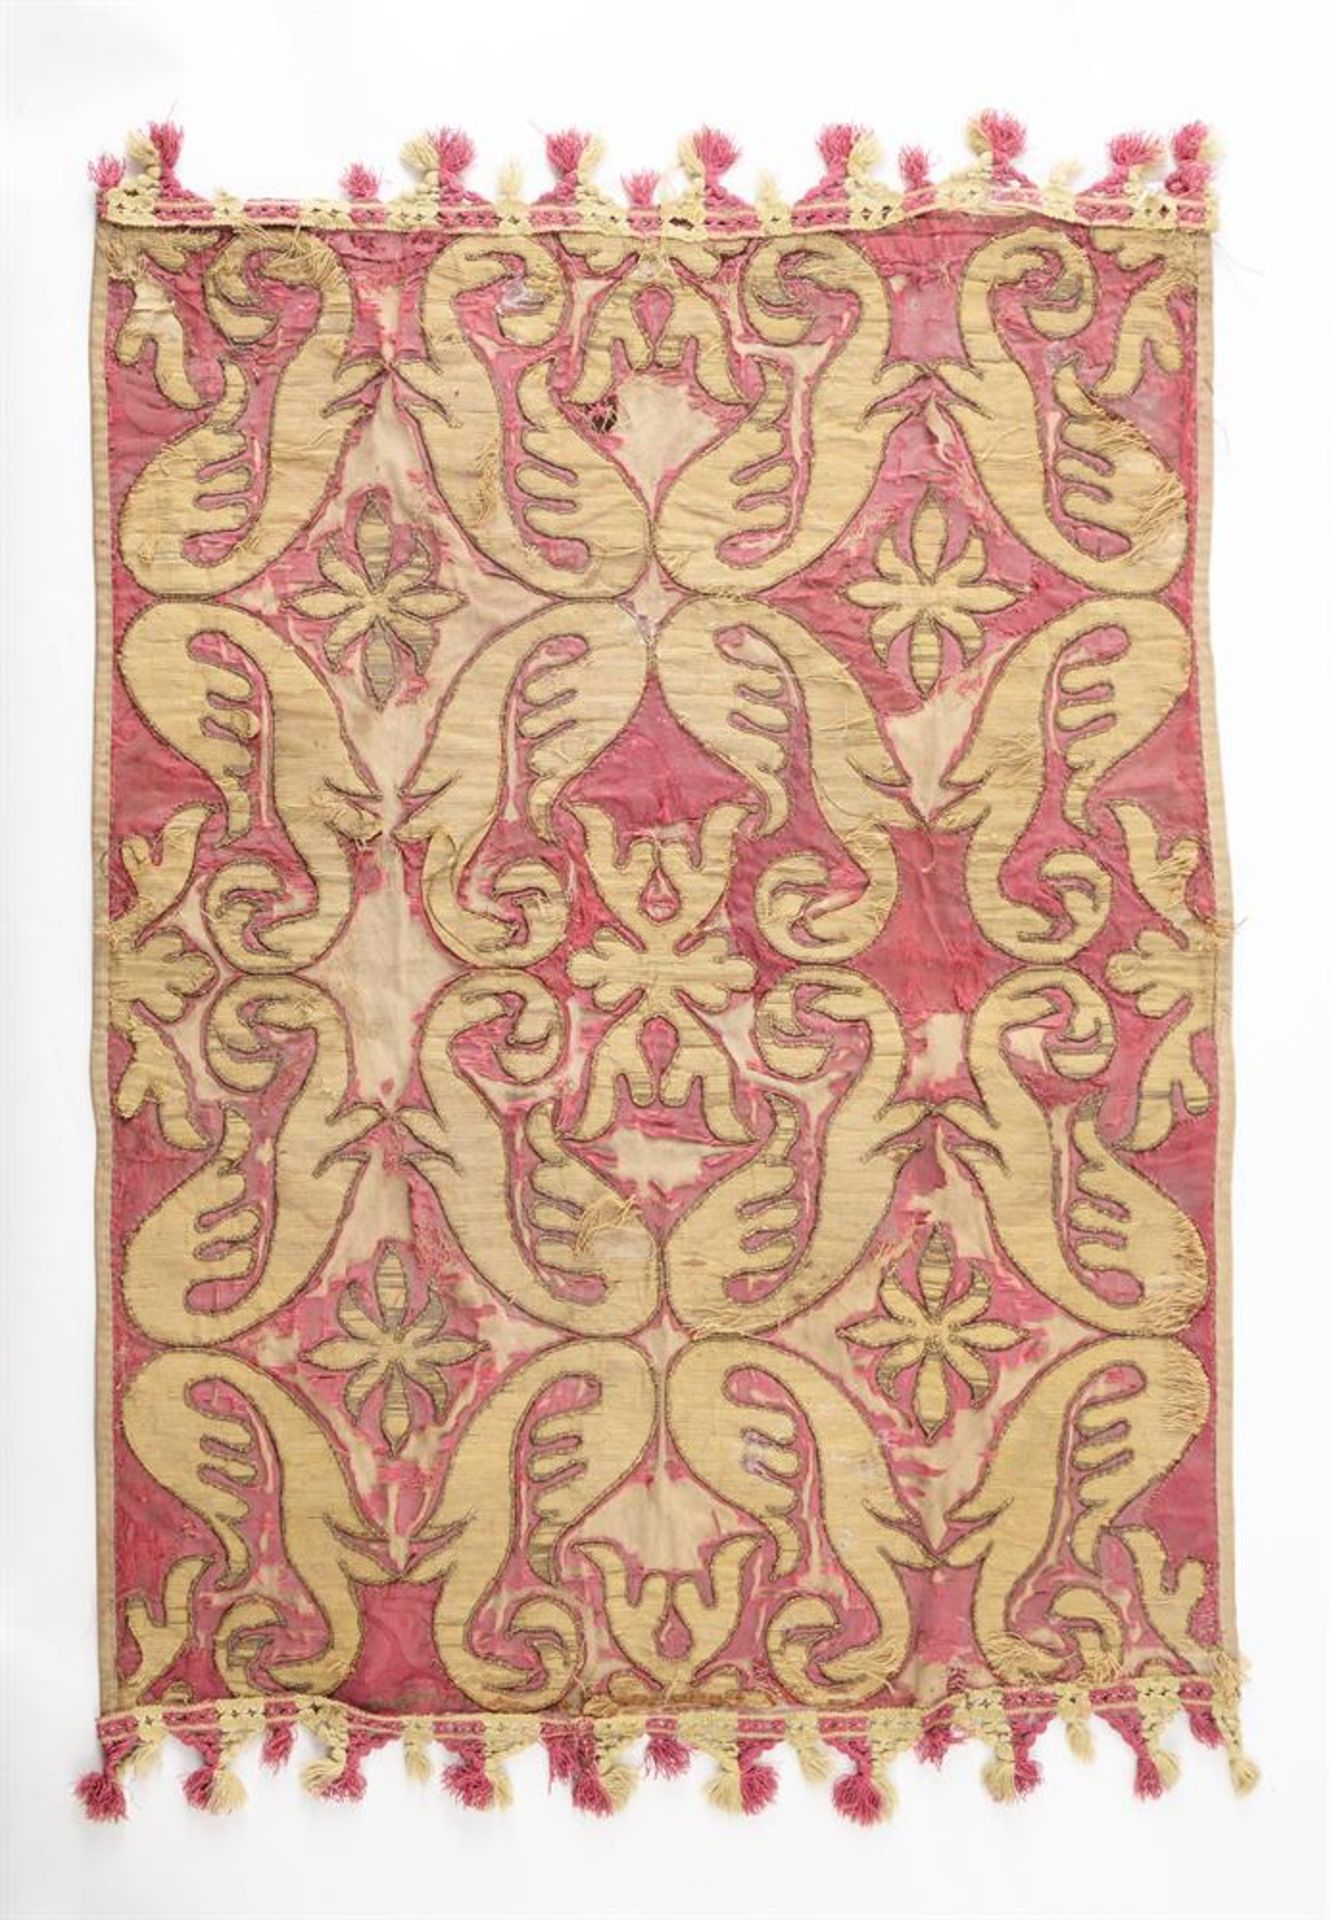 TEXTILES TO INCLUDE EARLY ORPHREY FRAGMENTS, LATE 16TH CENTURY AND LATER - Image 4 of 8